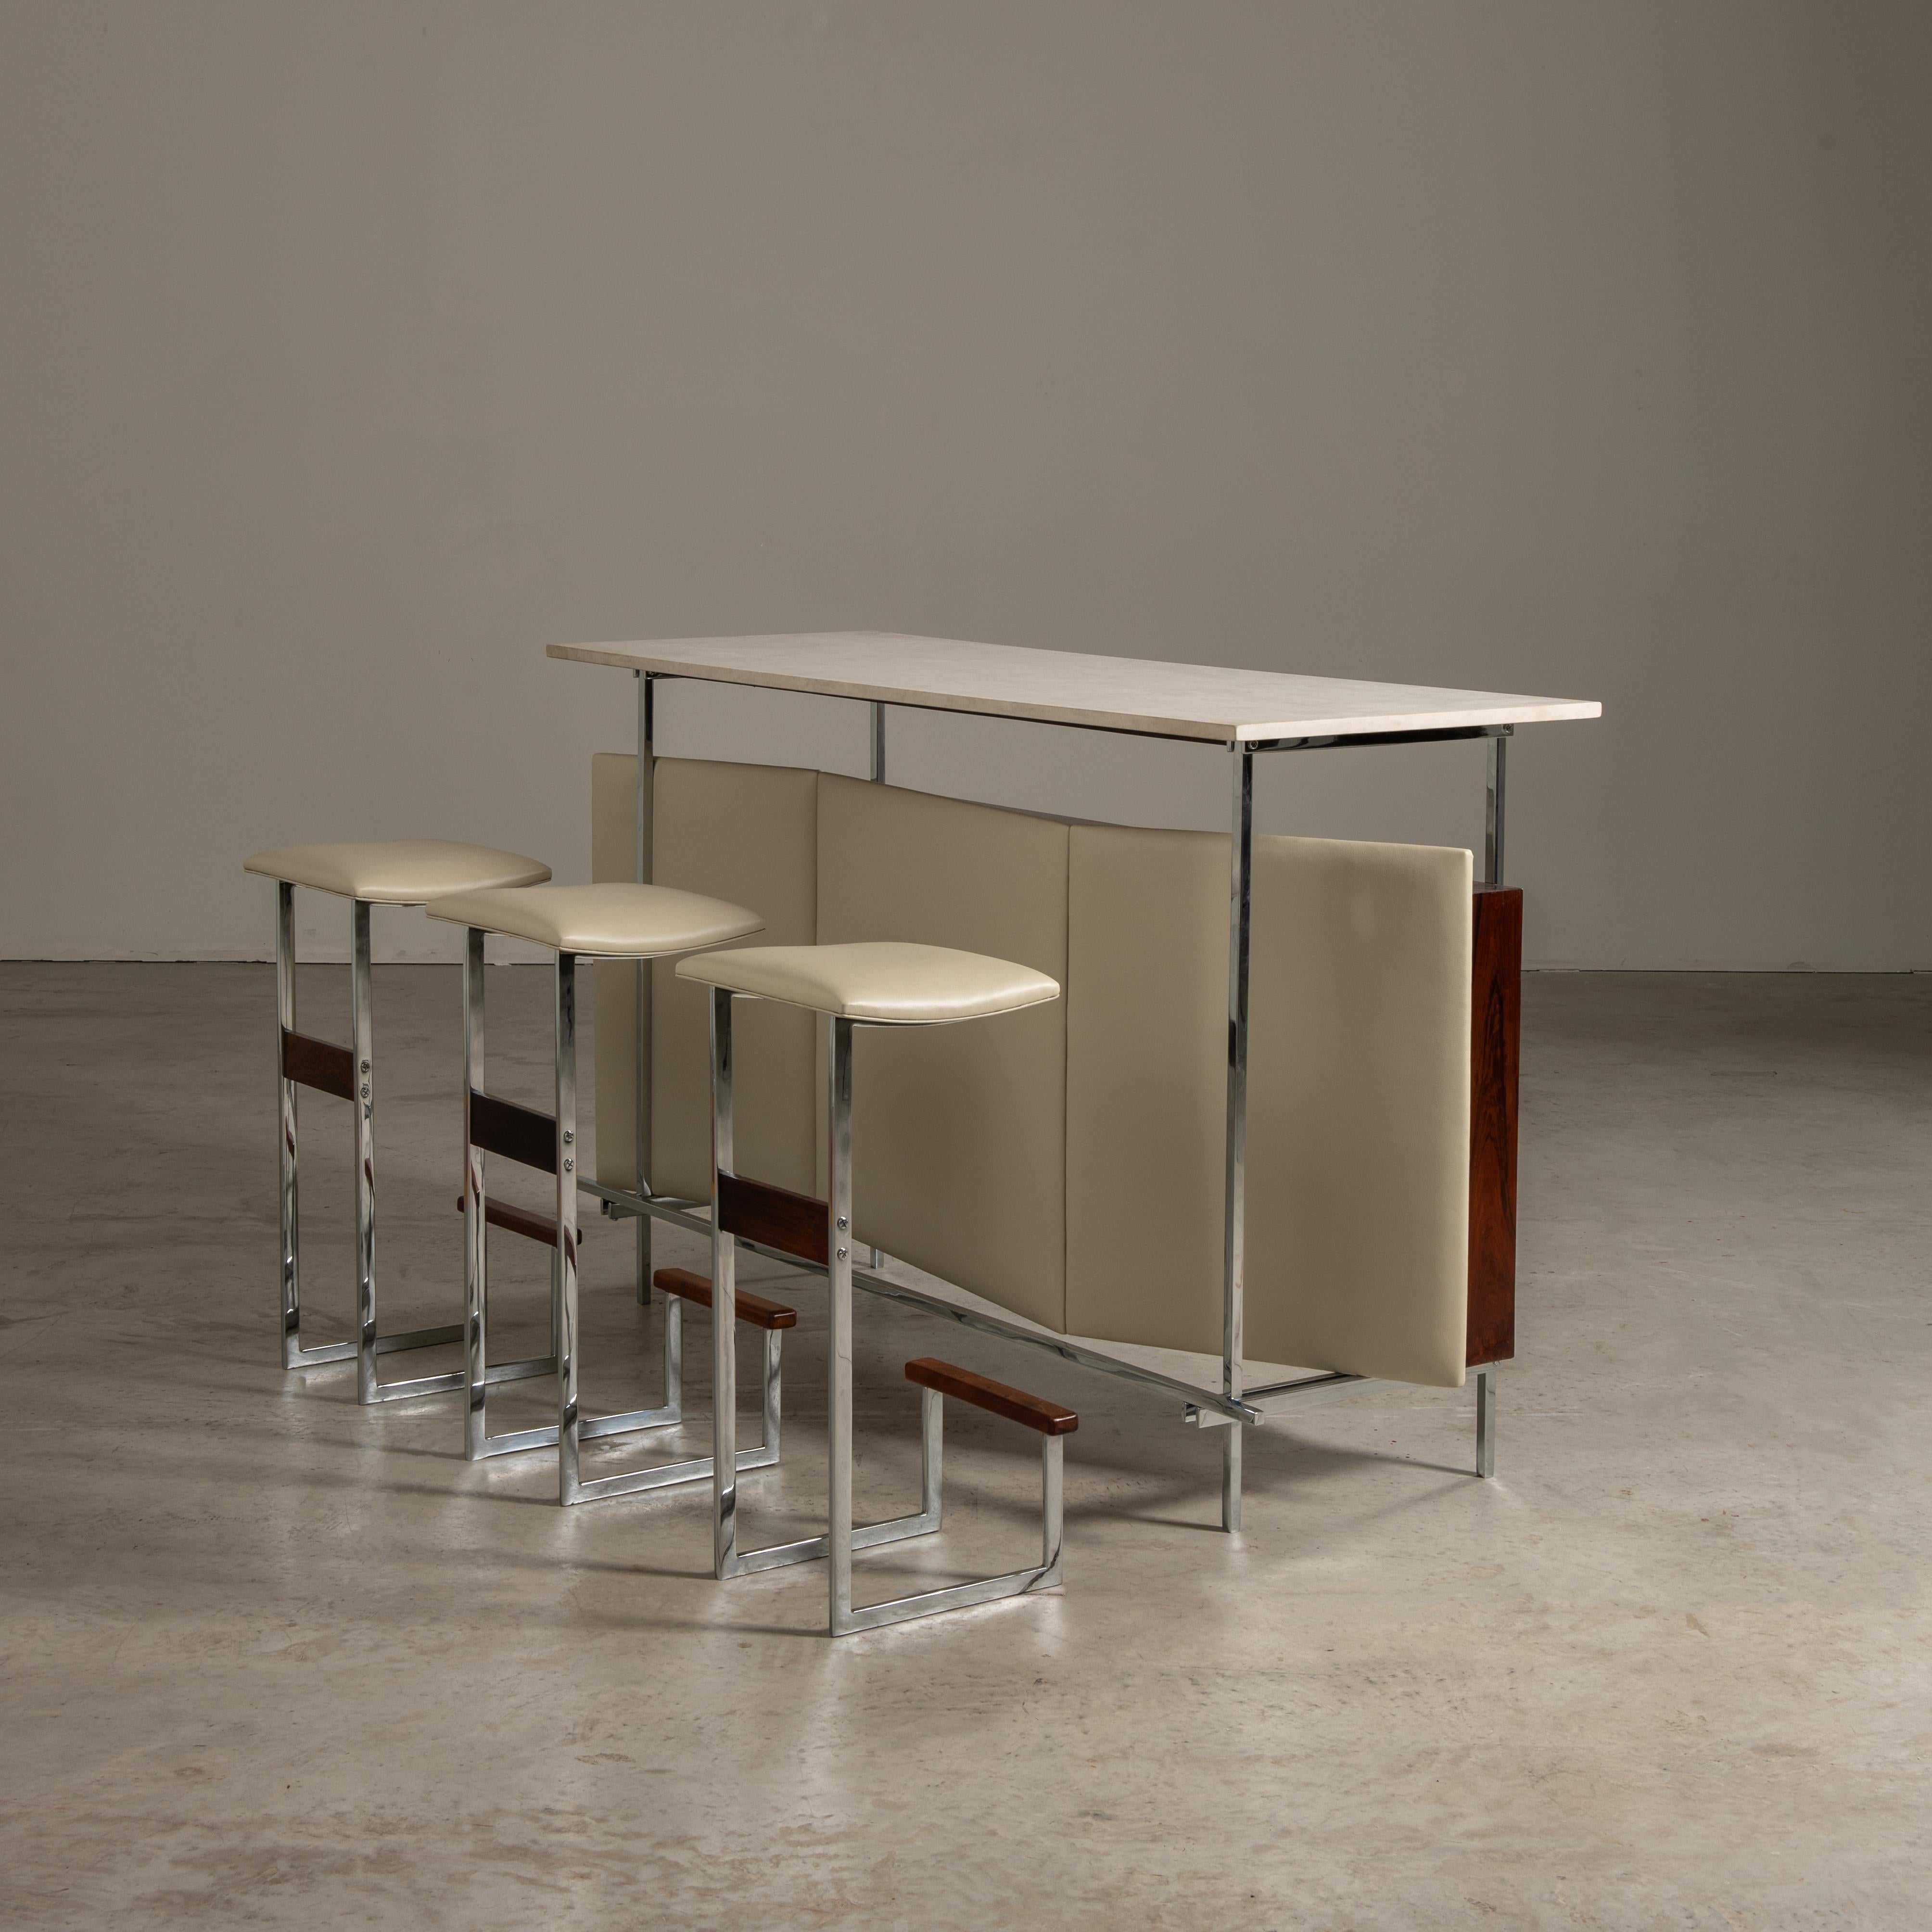 This dry bar with accompanying stools, a creation of the 1960s by l'Atelier, which was under the aegis of Jorge Zalszupin, is a distinguished example of mid-century Brazilian design. Zalszupin, known for his contribution to modern Brazilian